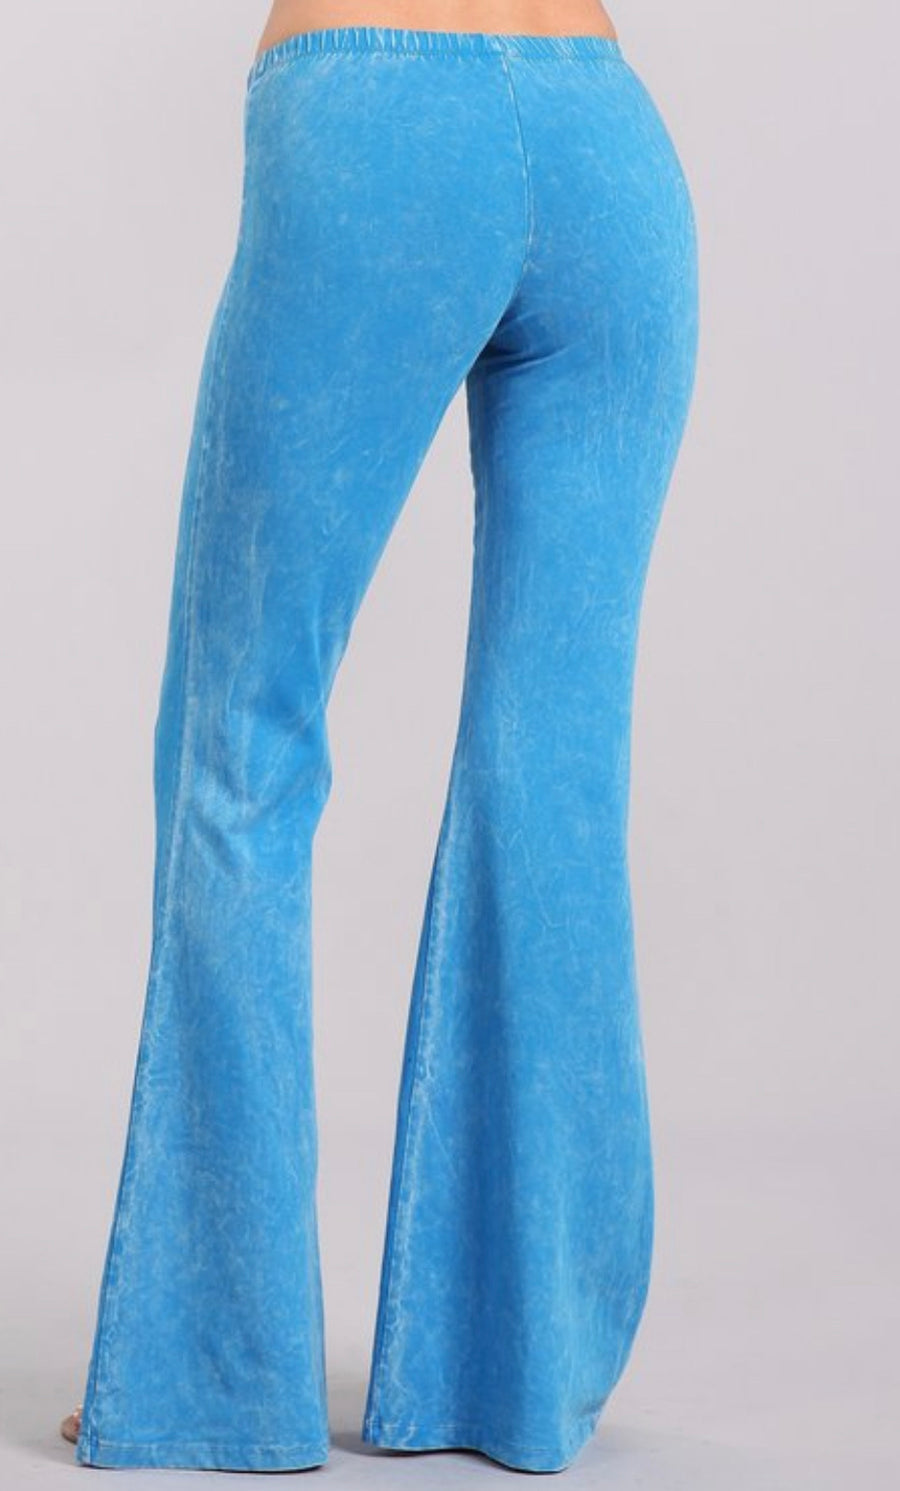 Mineral Wash Flare Pants- Bright Blue